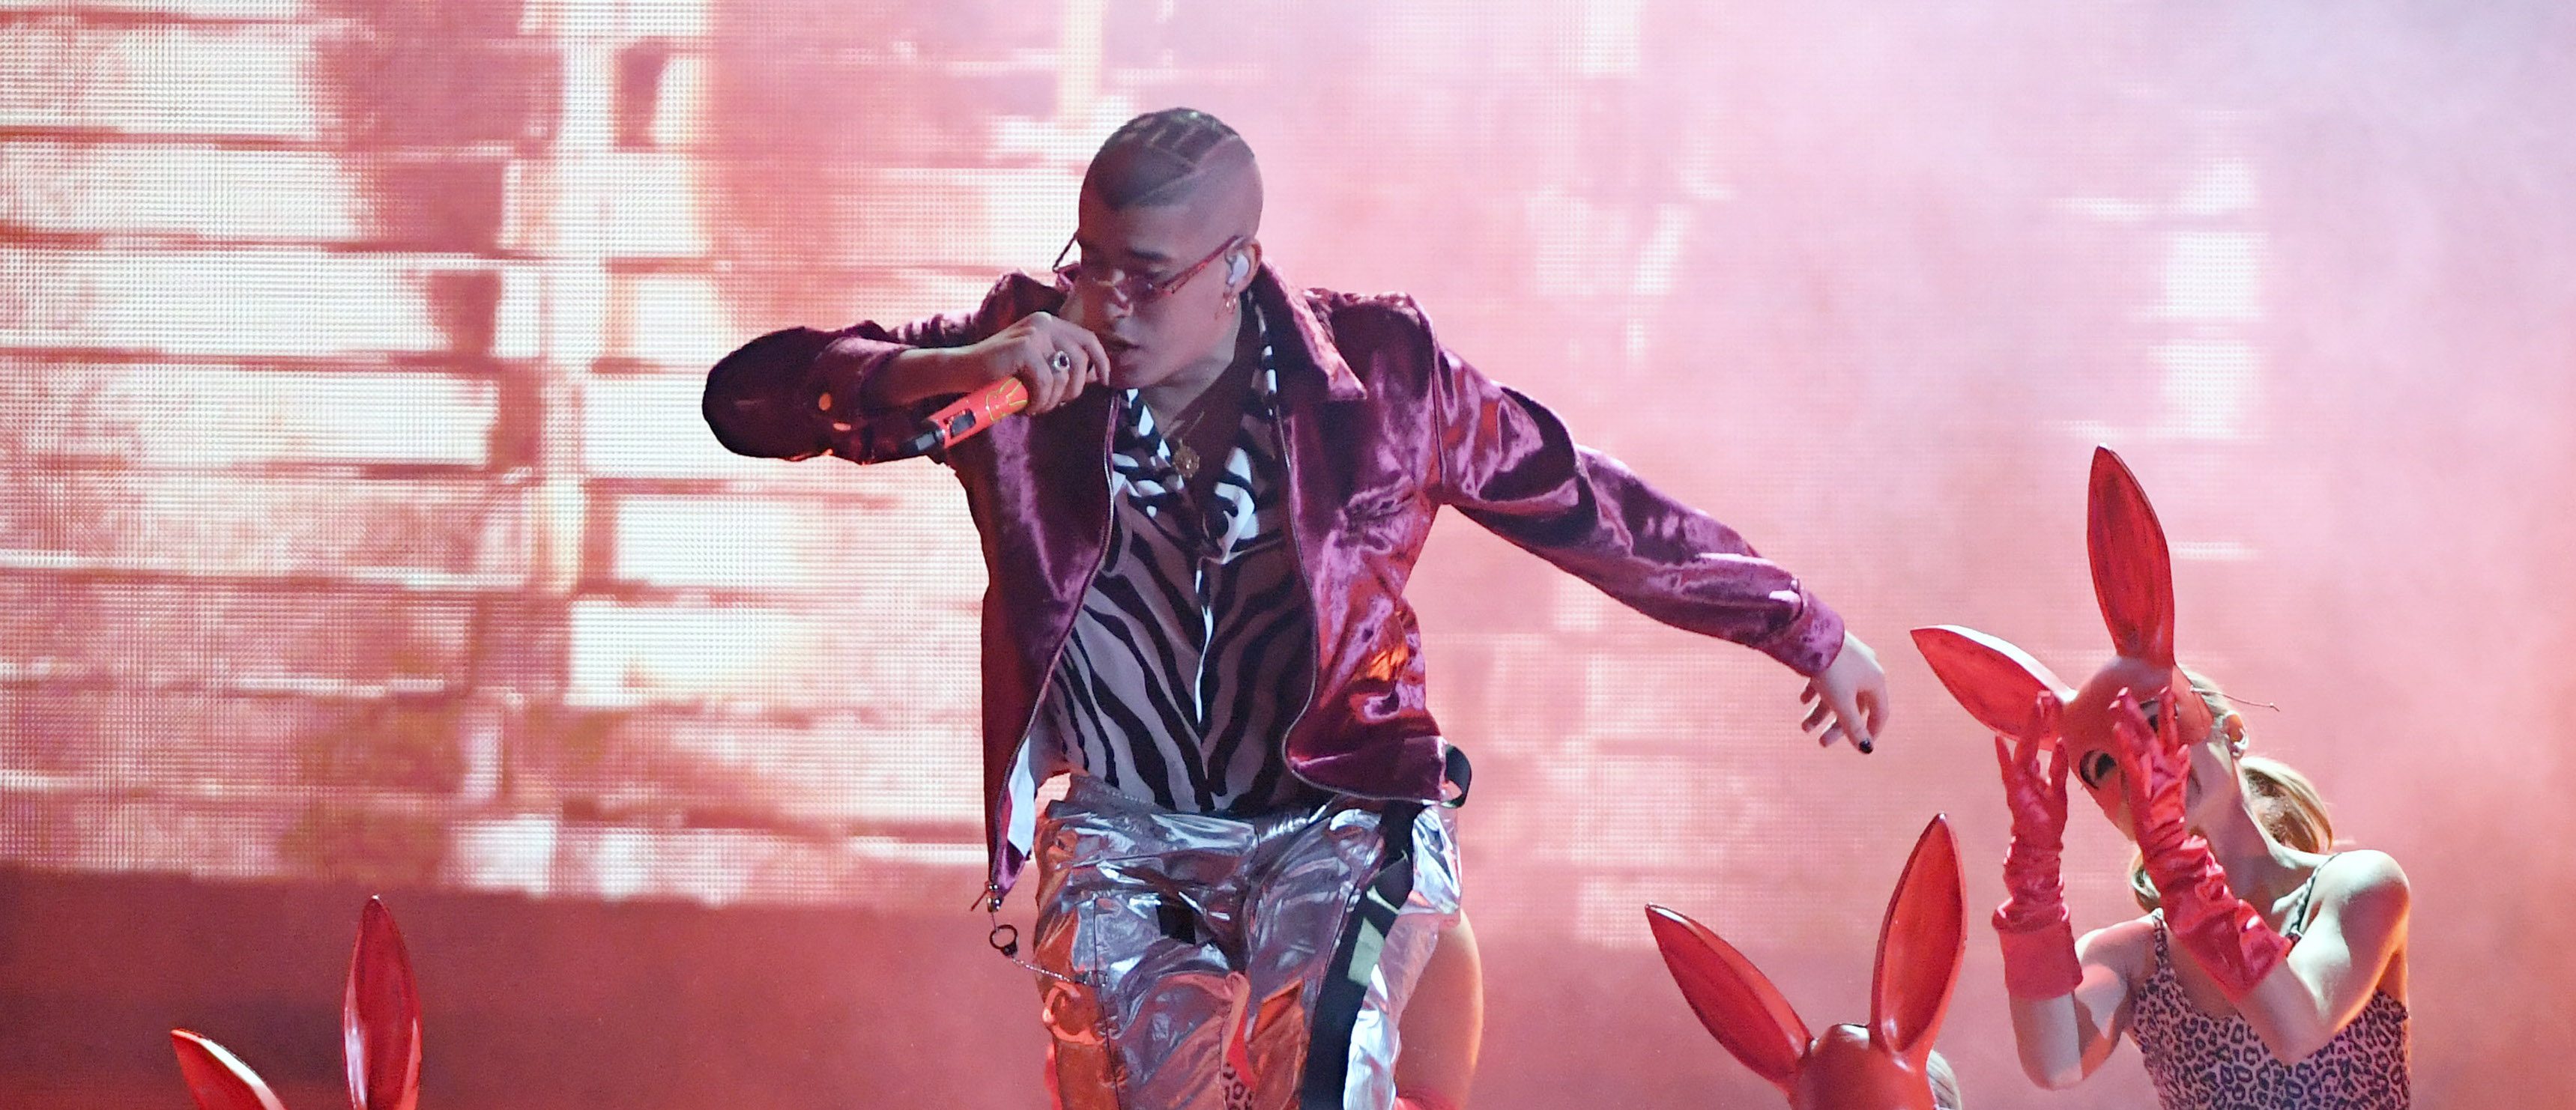 Bad Bunny Is Set To Perform a 'Historic' Livestream Concert